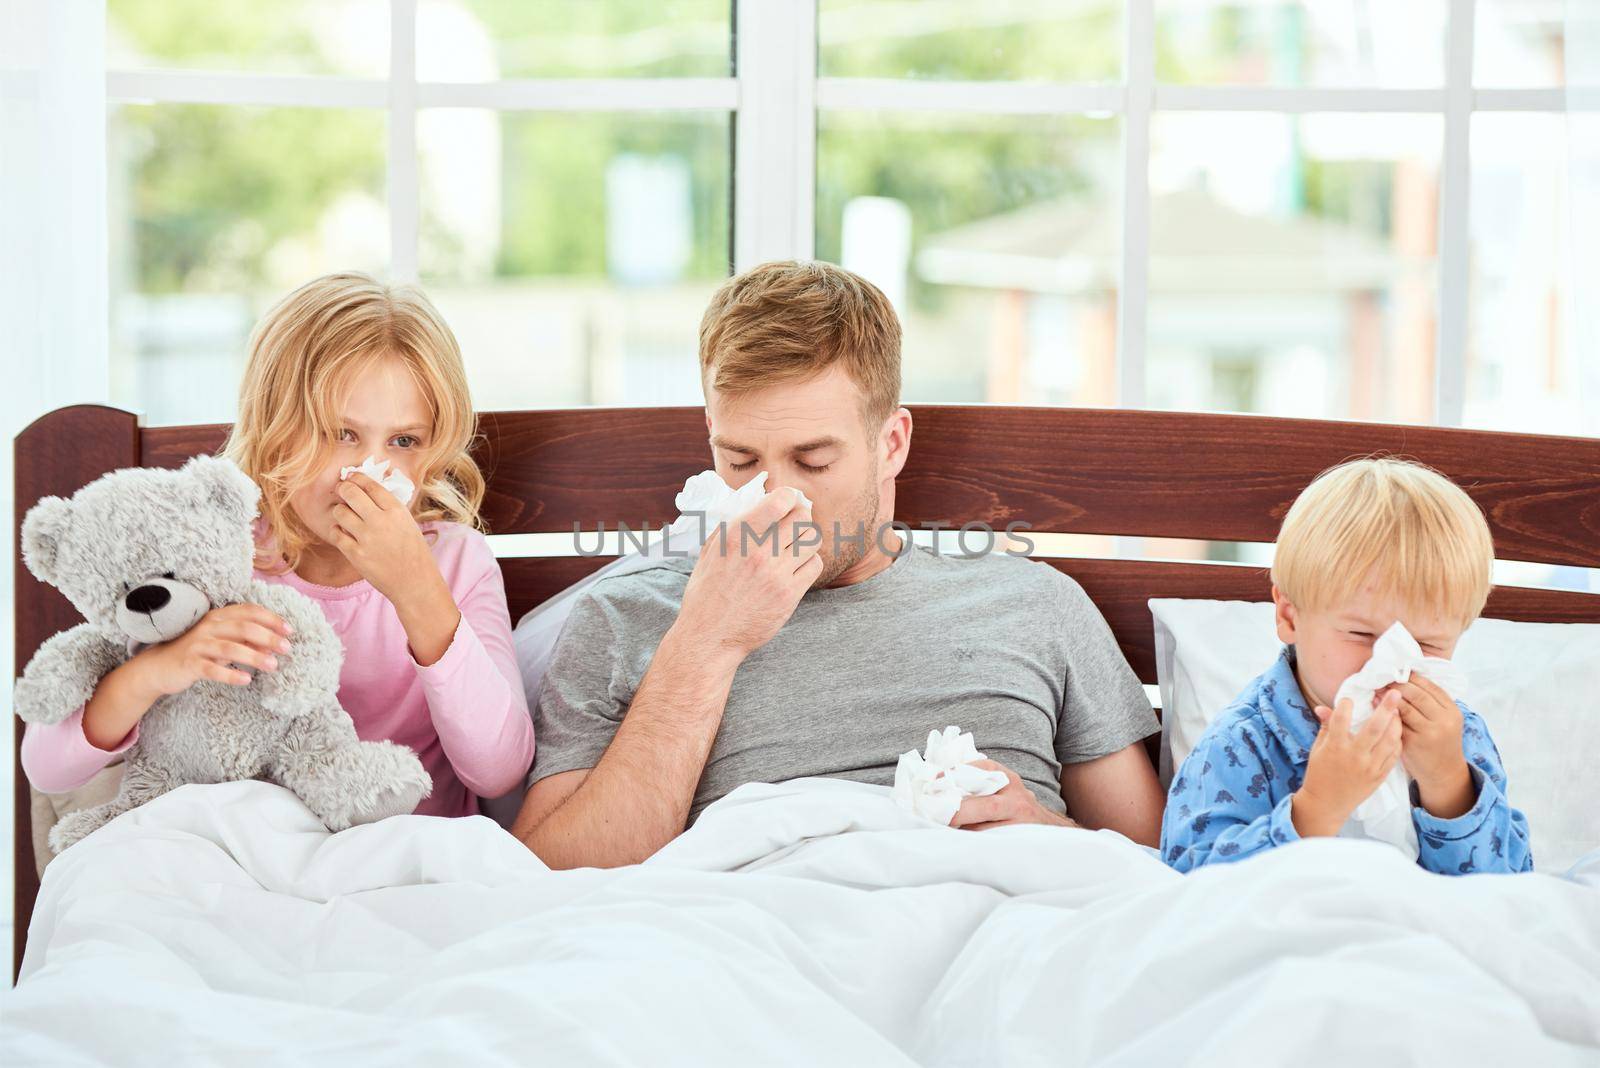 Young father and his children suffering from flu or cold and wiping their noses while lying in bed together. Virus disease. Coronavirus concept. Sick family at home. Health concept